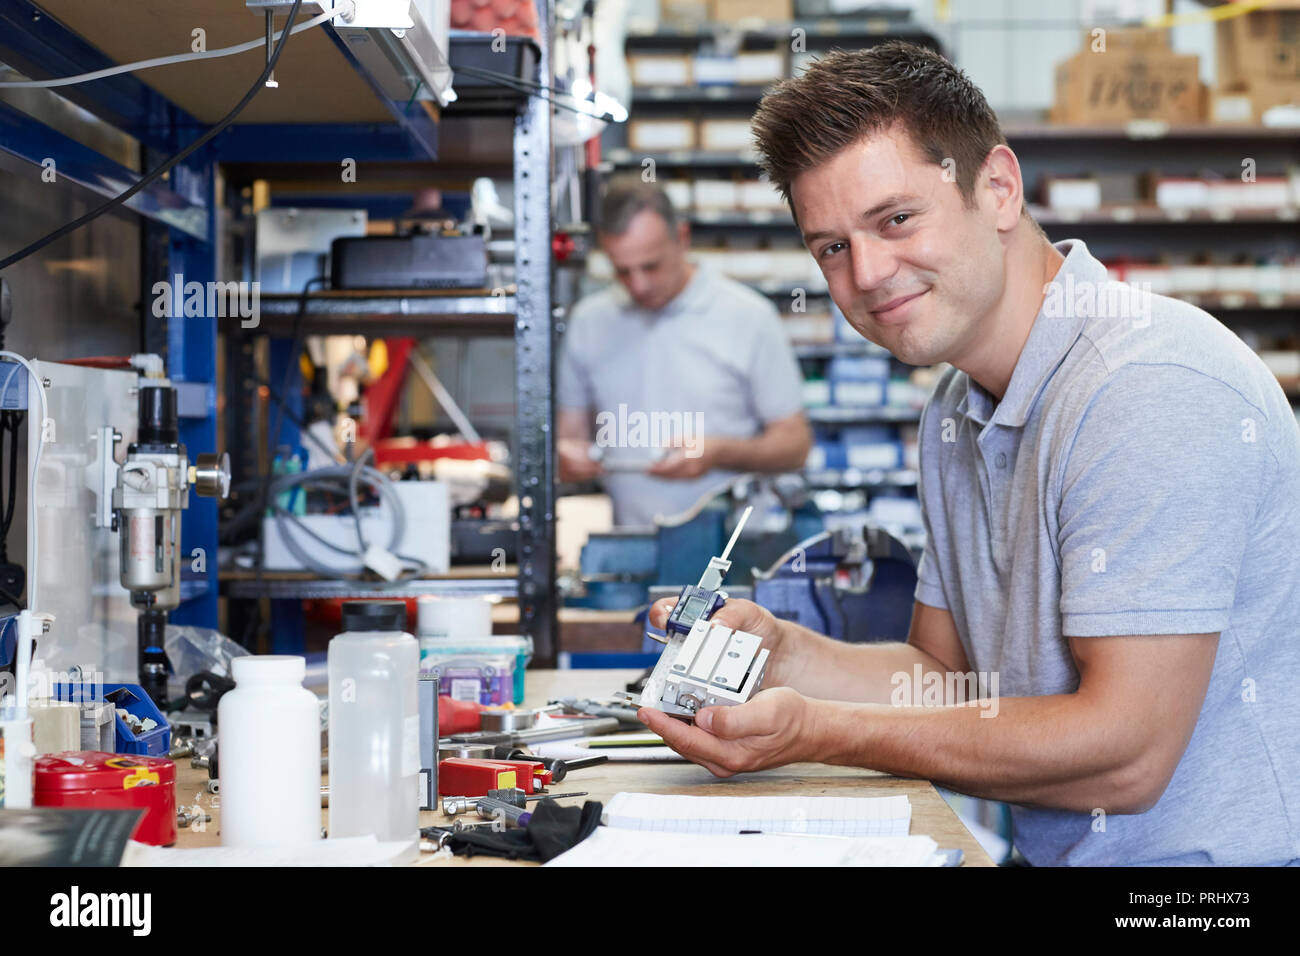 Portrait Of Engineer In Factory Measuring Component At Work Bench Using Micrometer Stock Photo